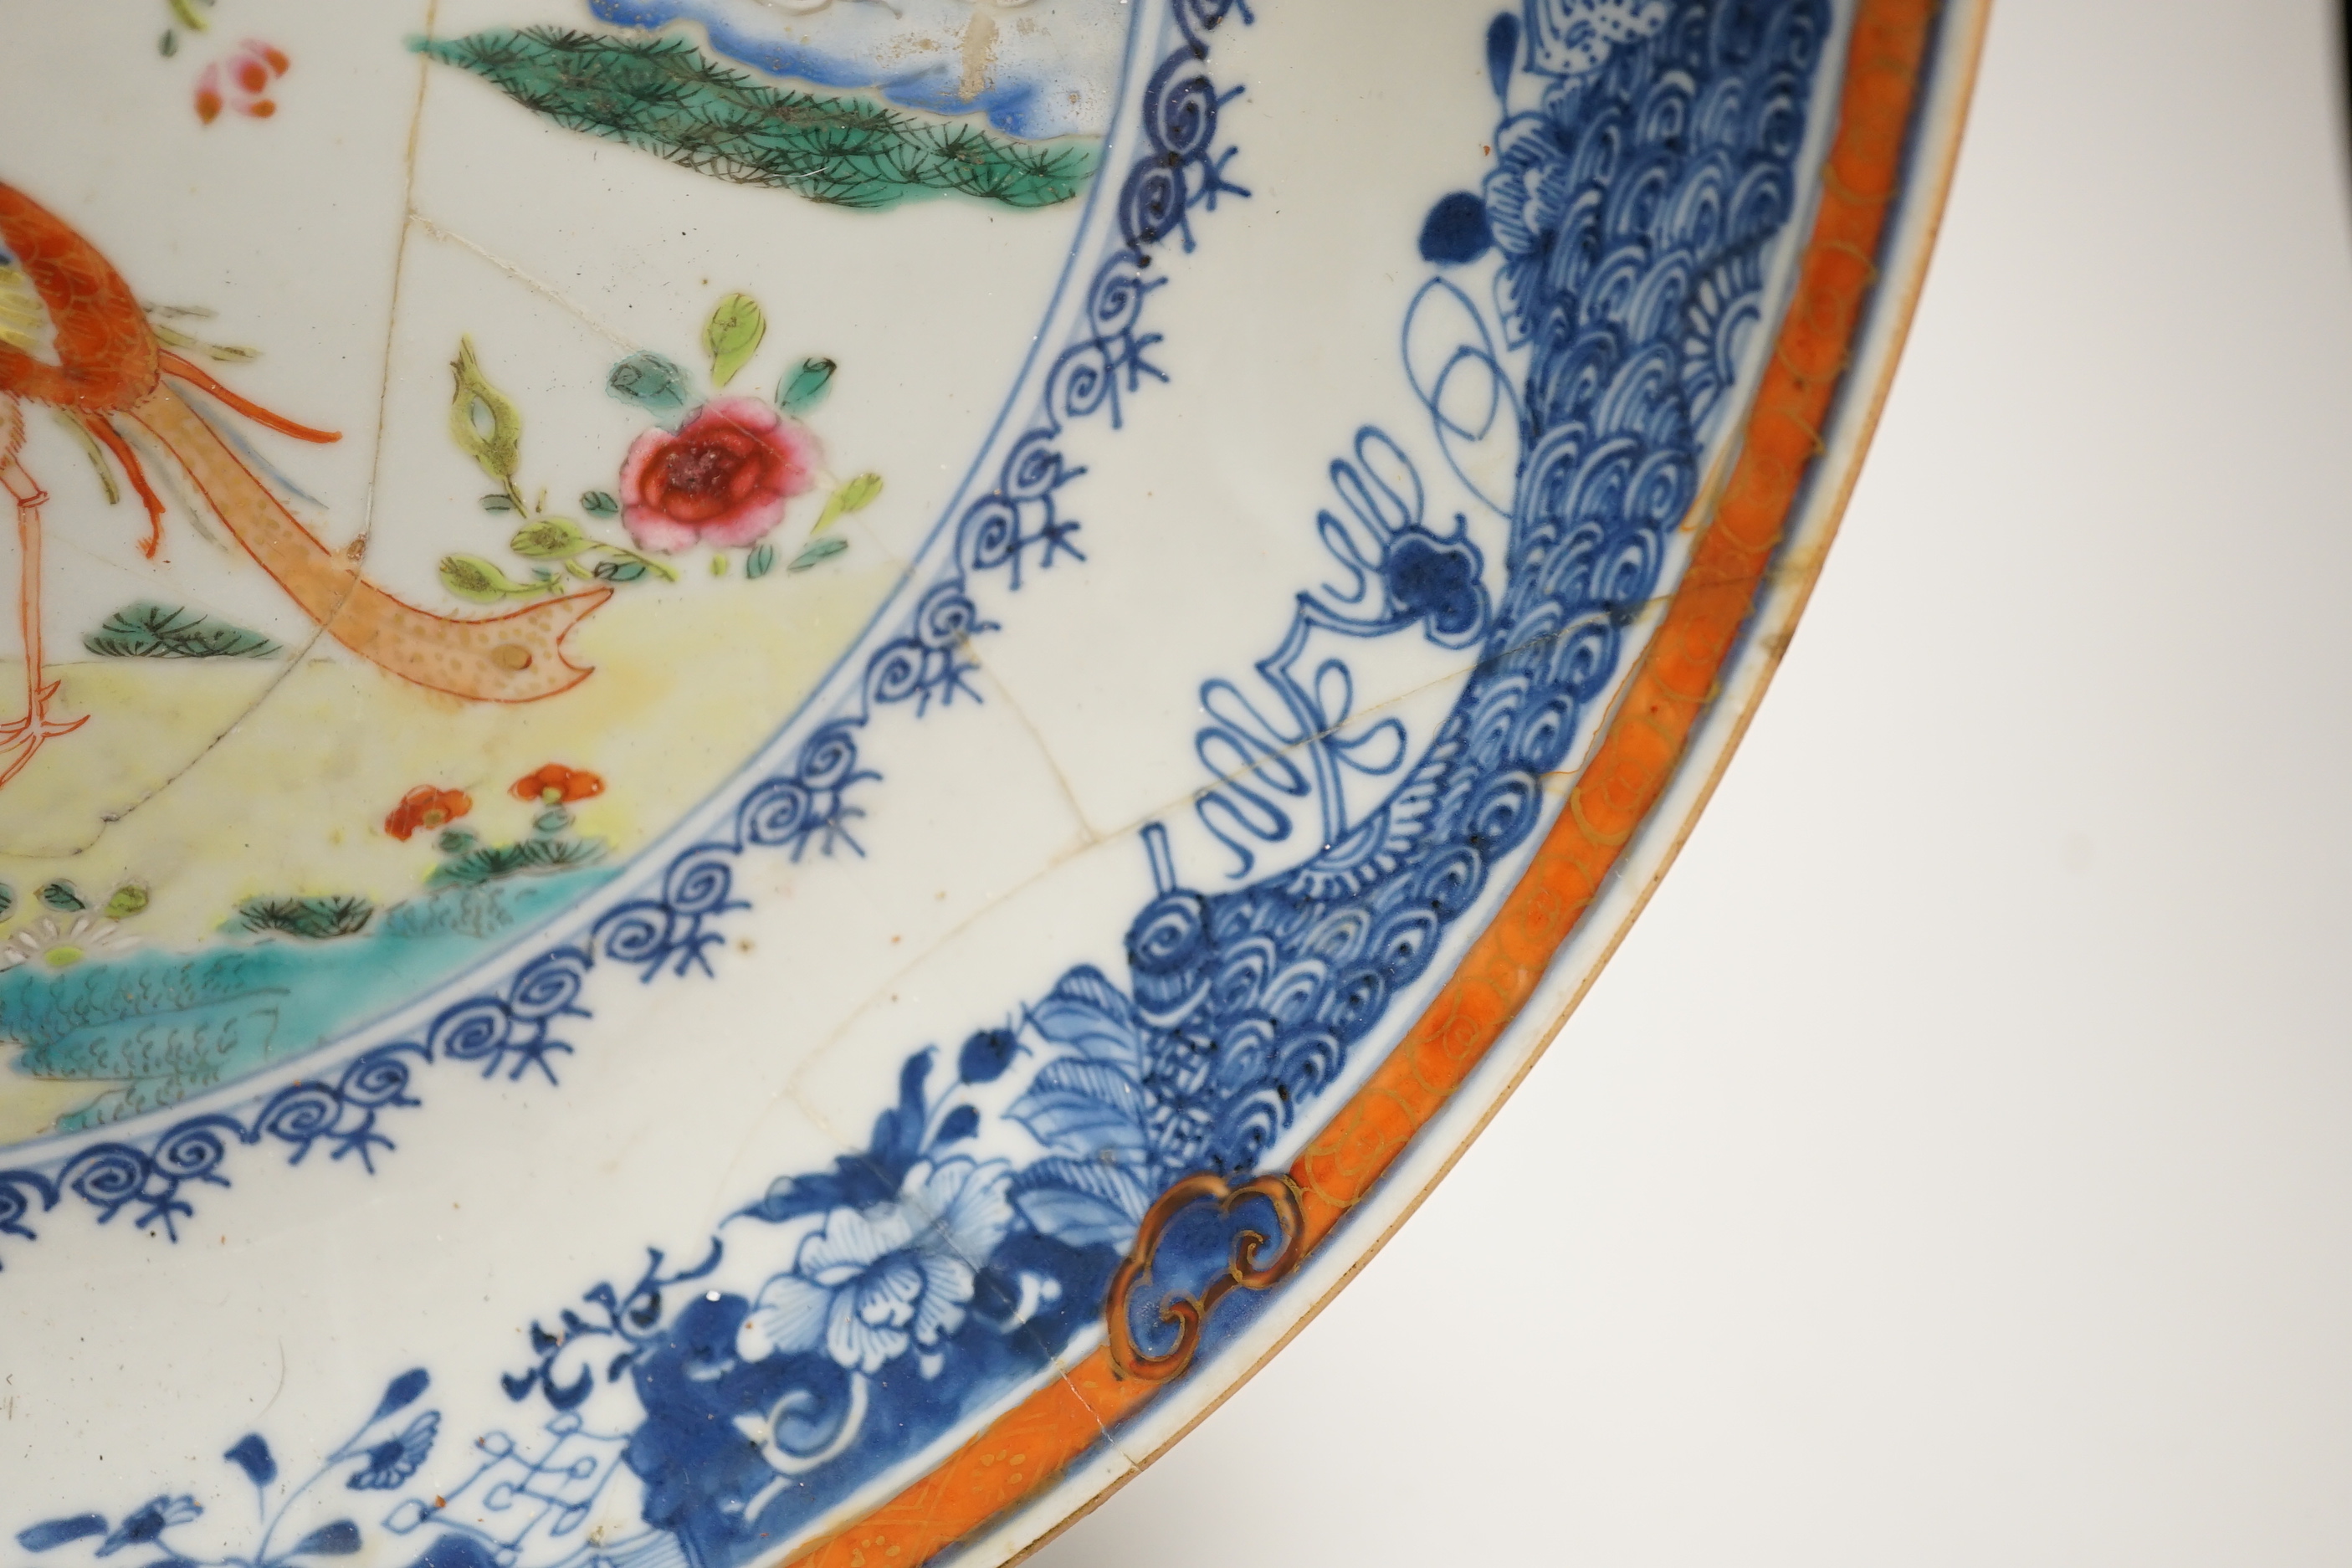 An 18th-century Chinese export famille rose twin pheasant dish and a pair of blue and white bowls, the largest 30cm in diameter